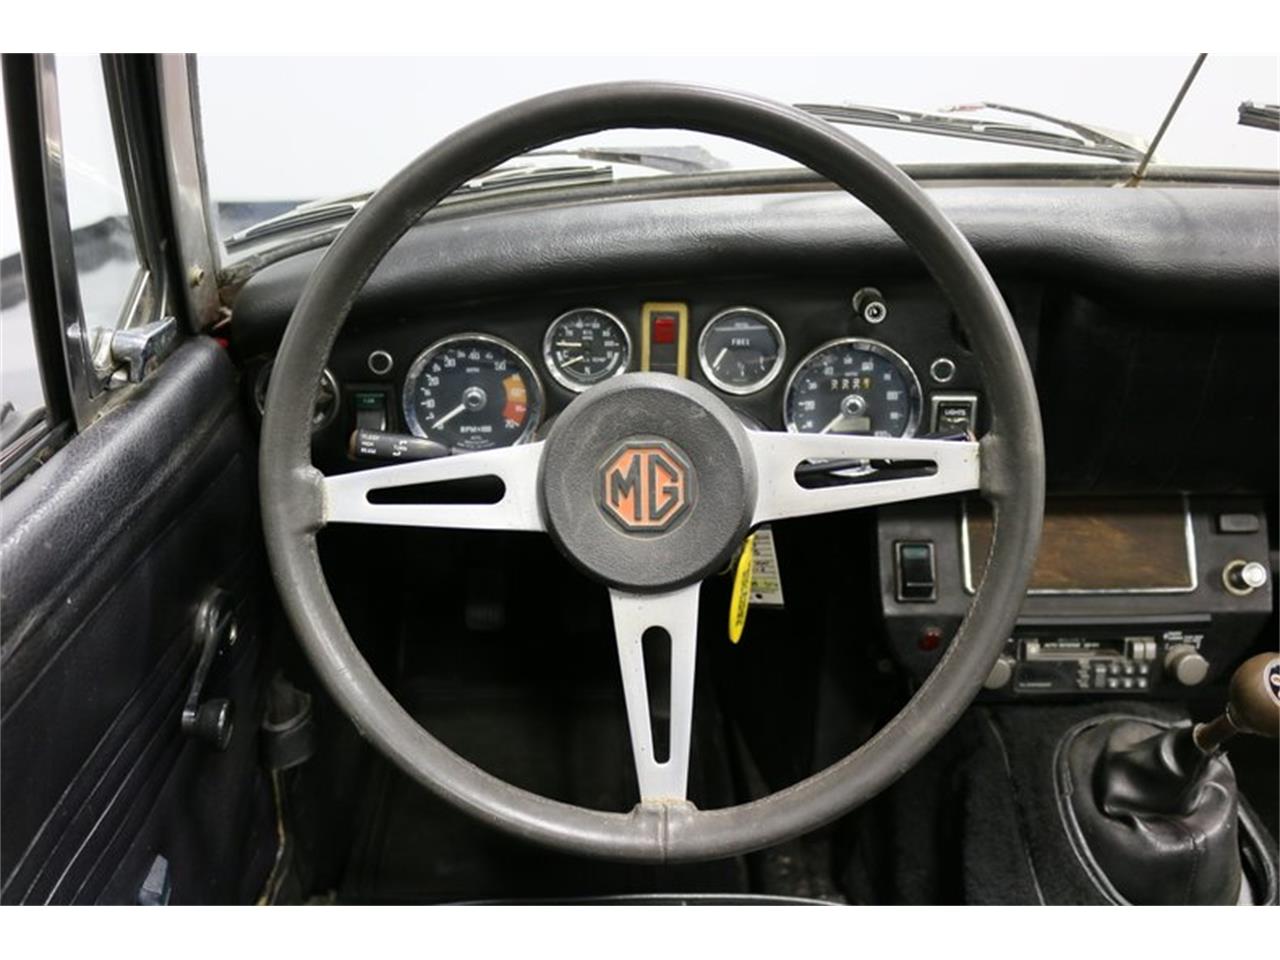 1973 MG Midget for sale in Fort Worth, TX – photo 53